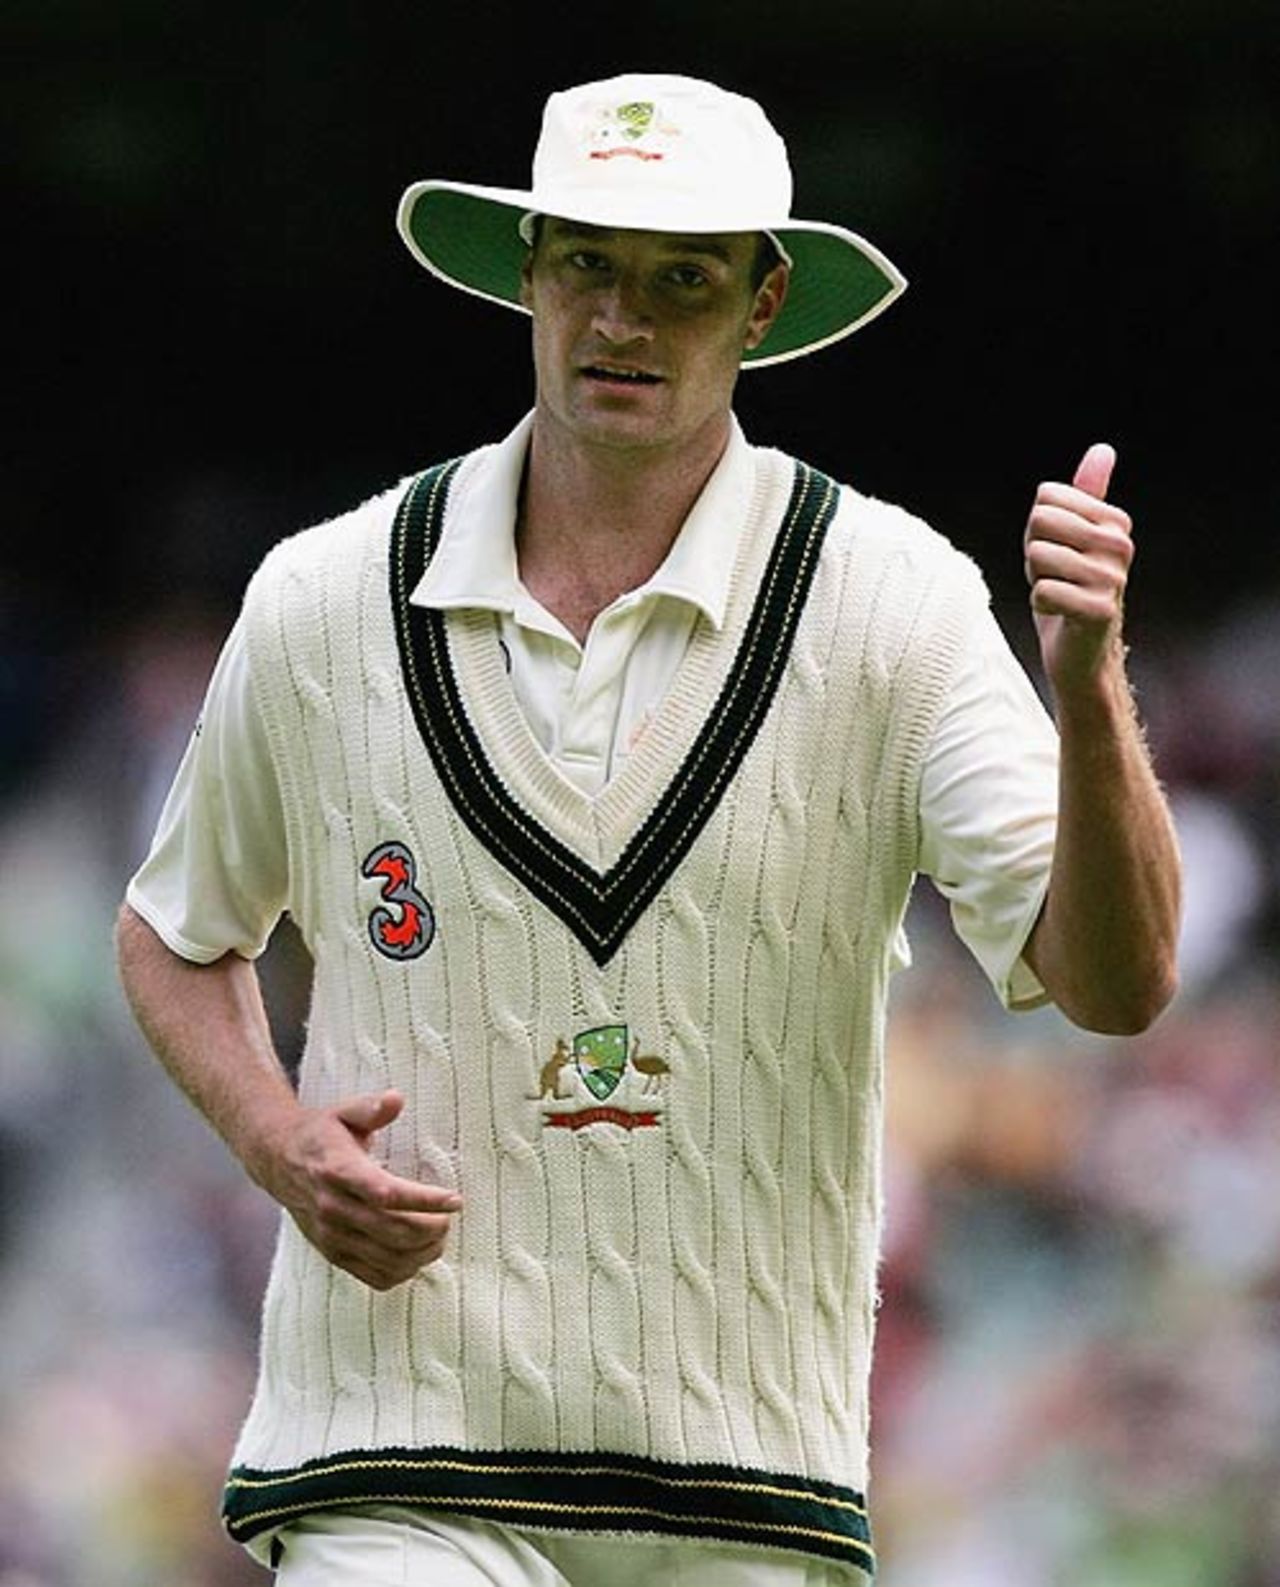 Stuart Clark gives the crowd a thumbs-up after taking a wicket, Australia v England, 4th Test, Melbourne, December 28, 2006